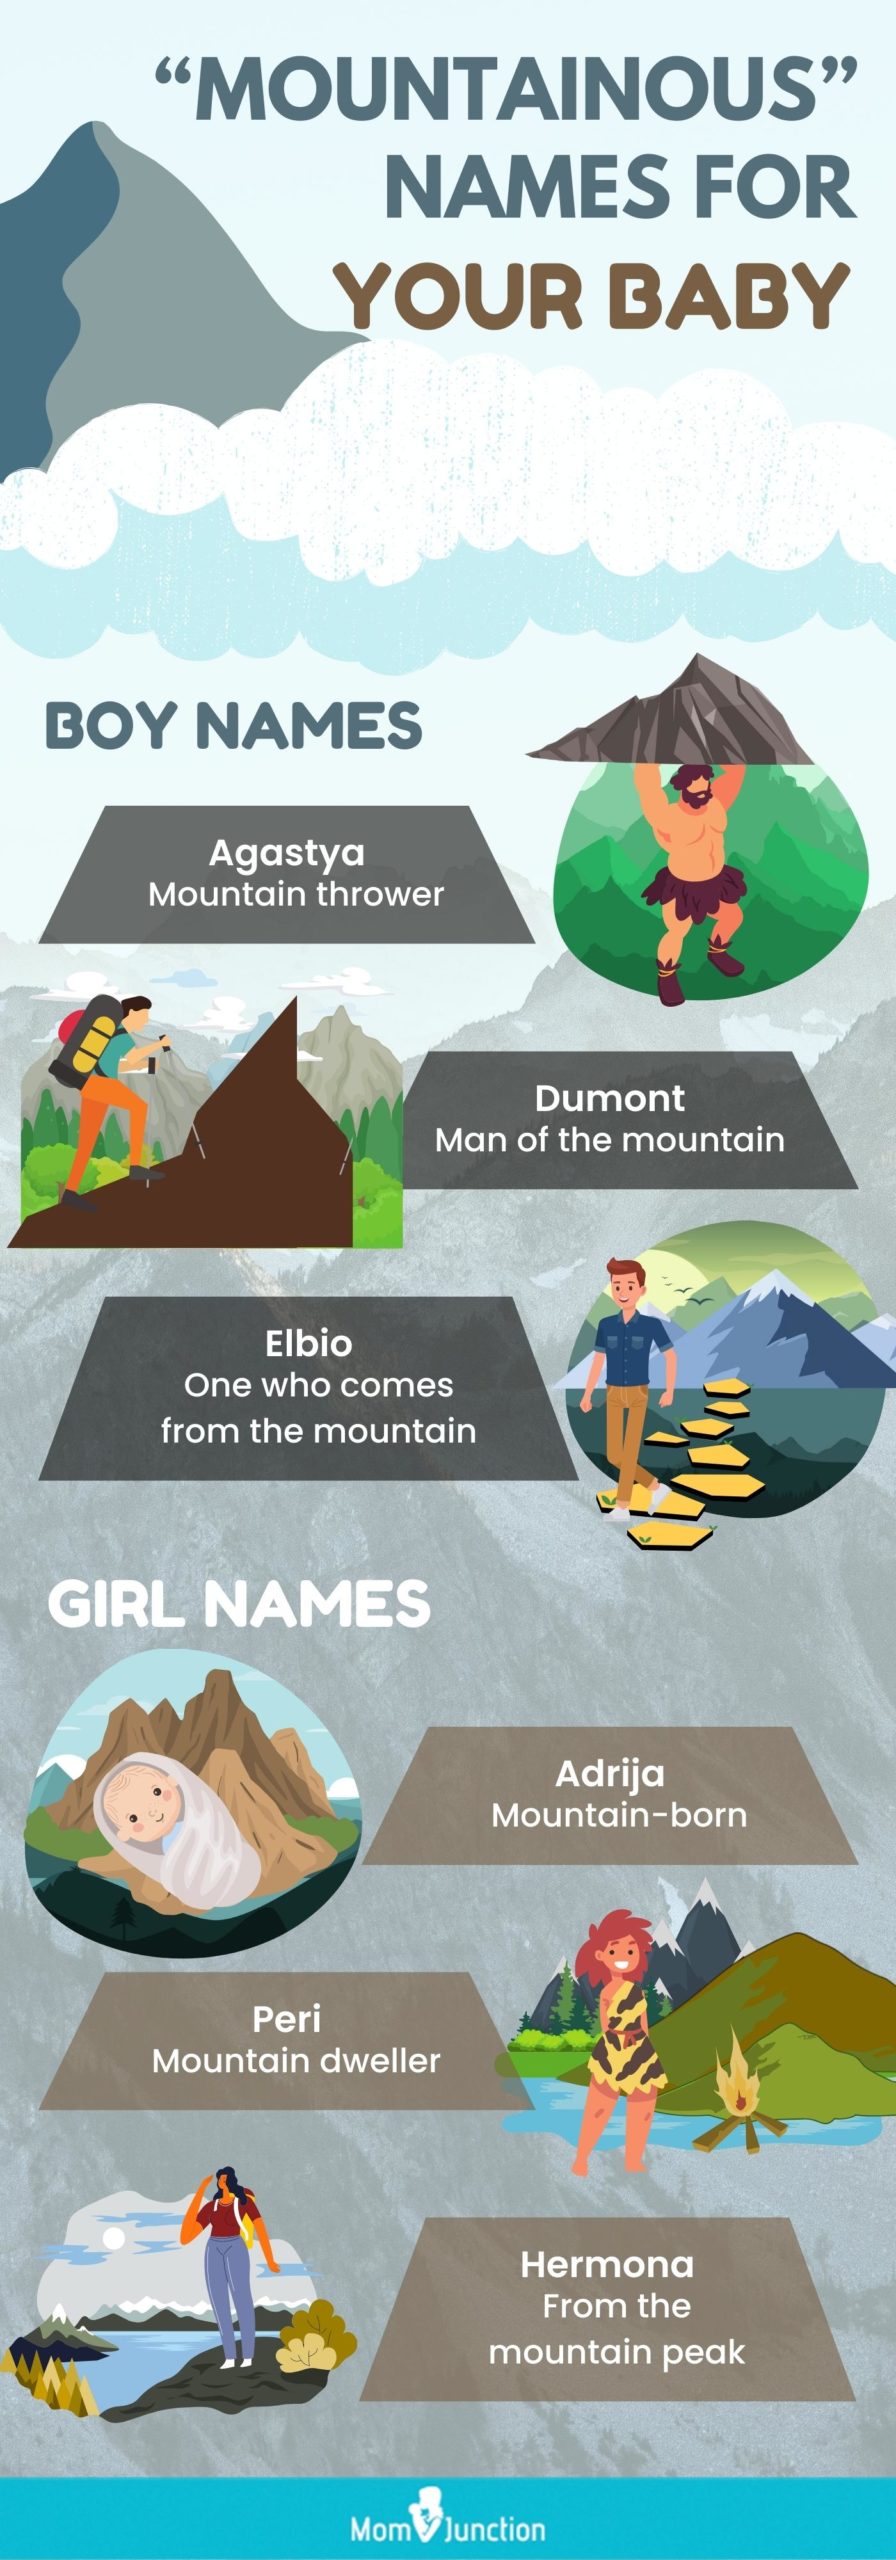 mountainous names for your baby (infographic)